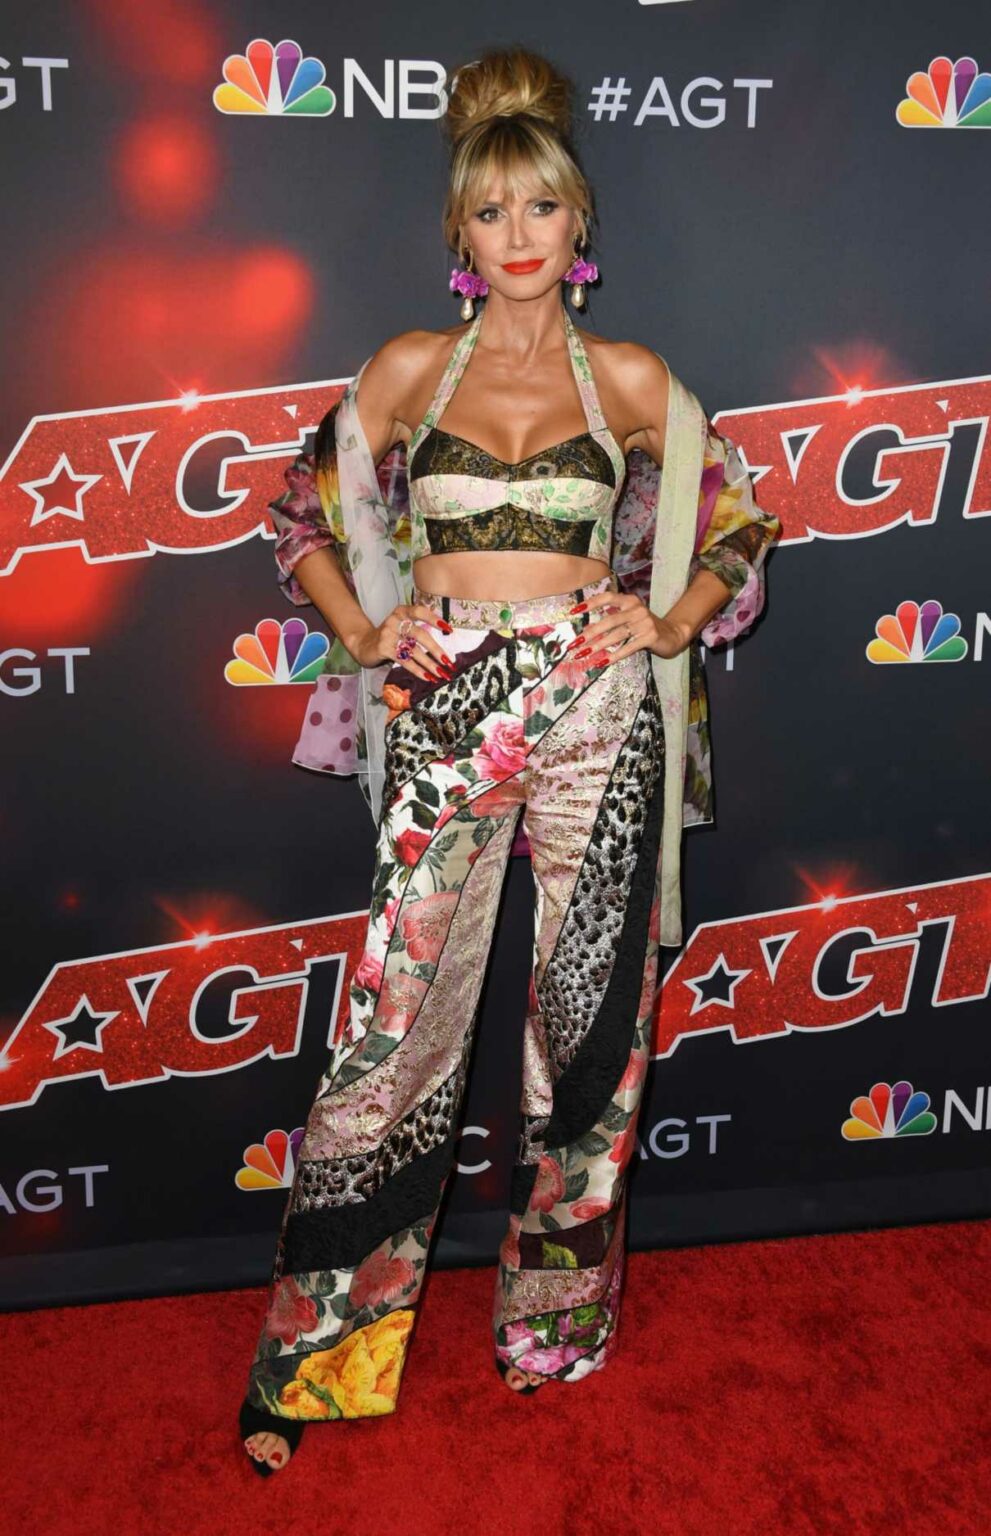 Heidi Klum Attends Americas Got Talent Season 16 Live Show At Dolby Theatre In Hollywood 0817 